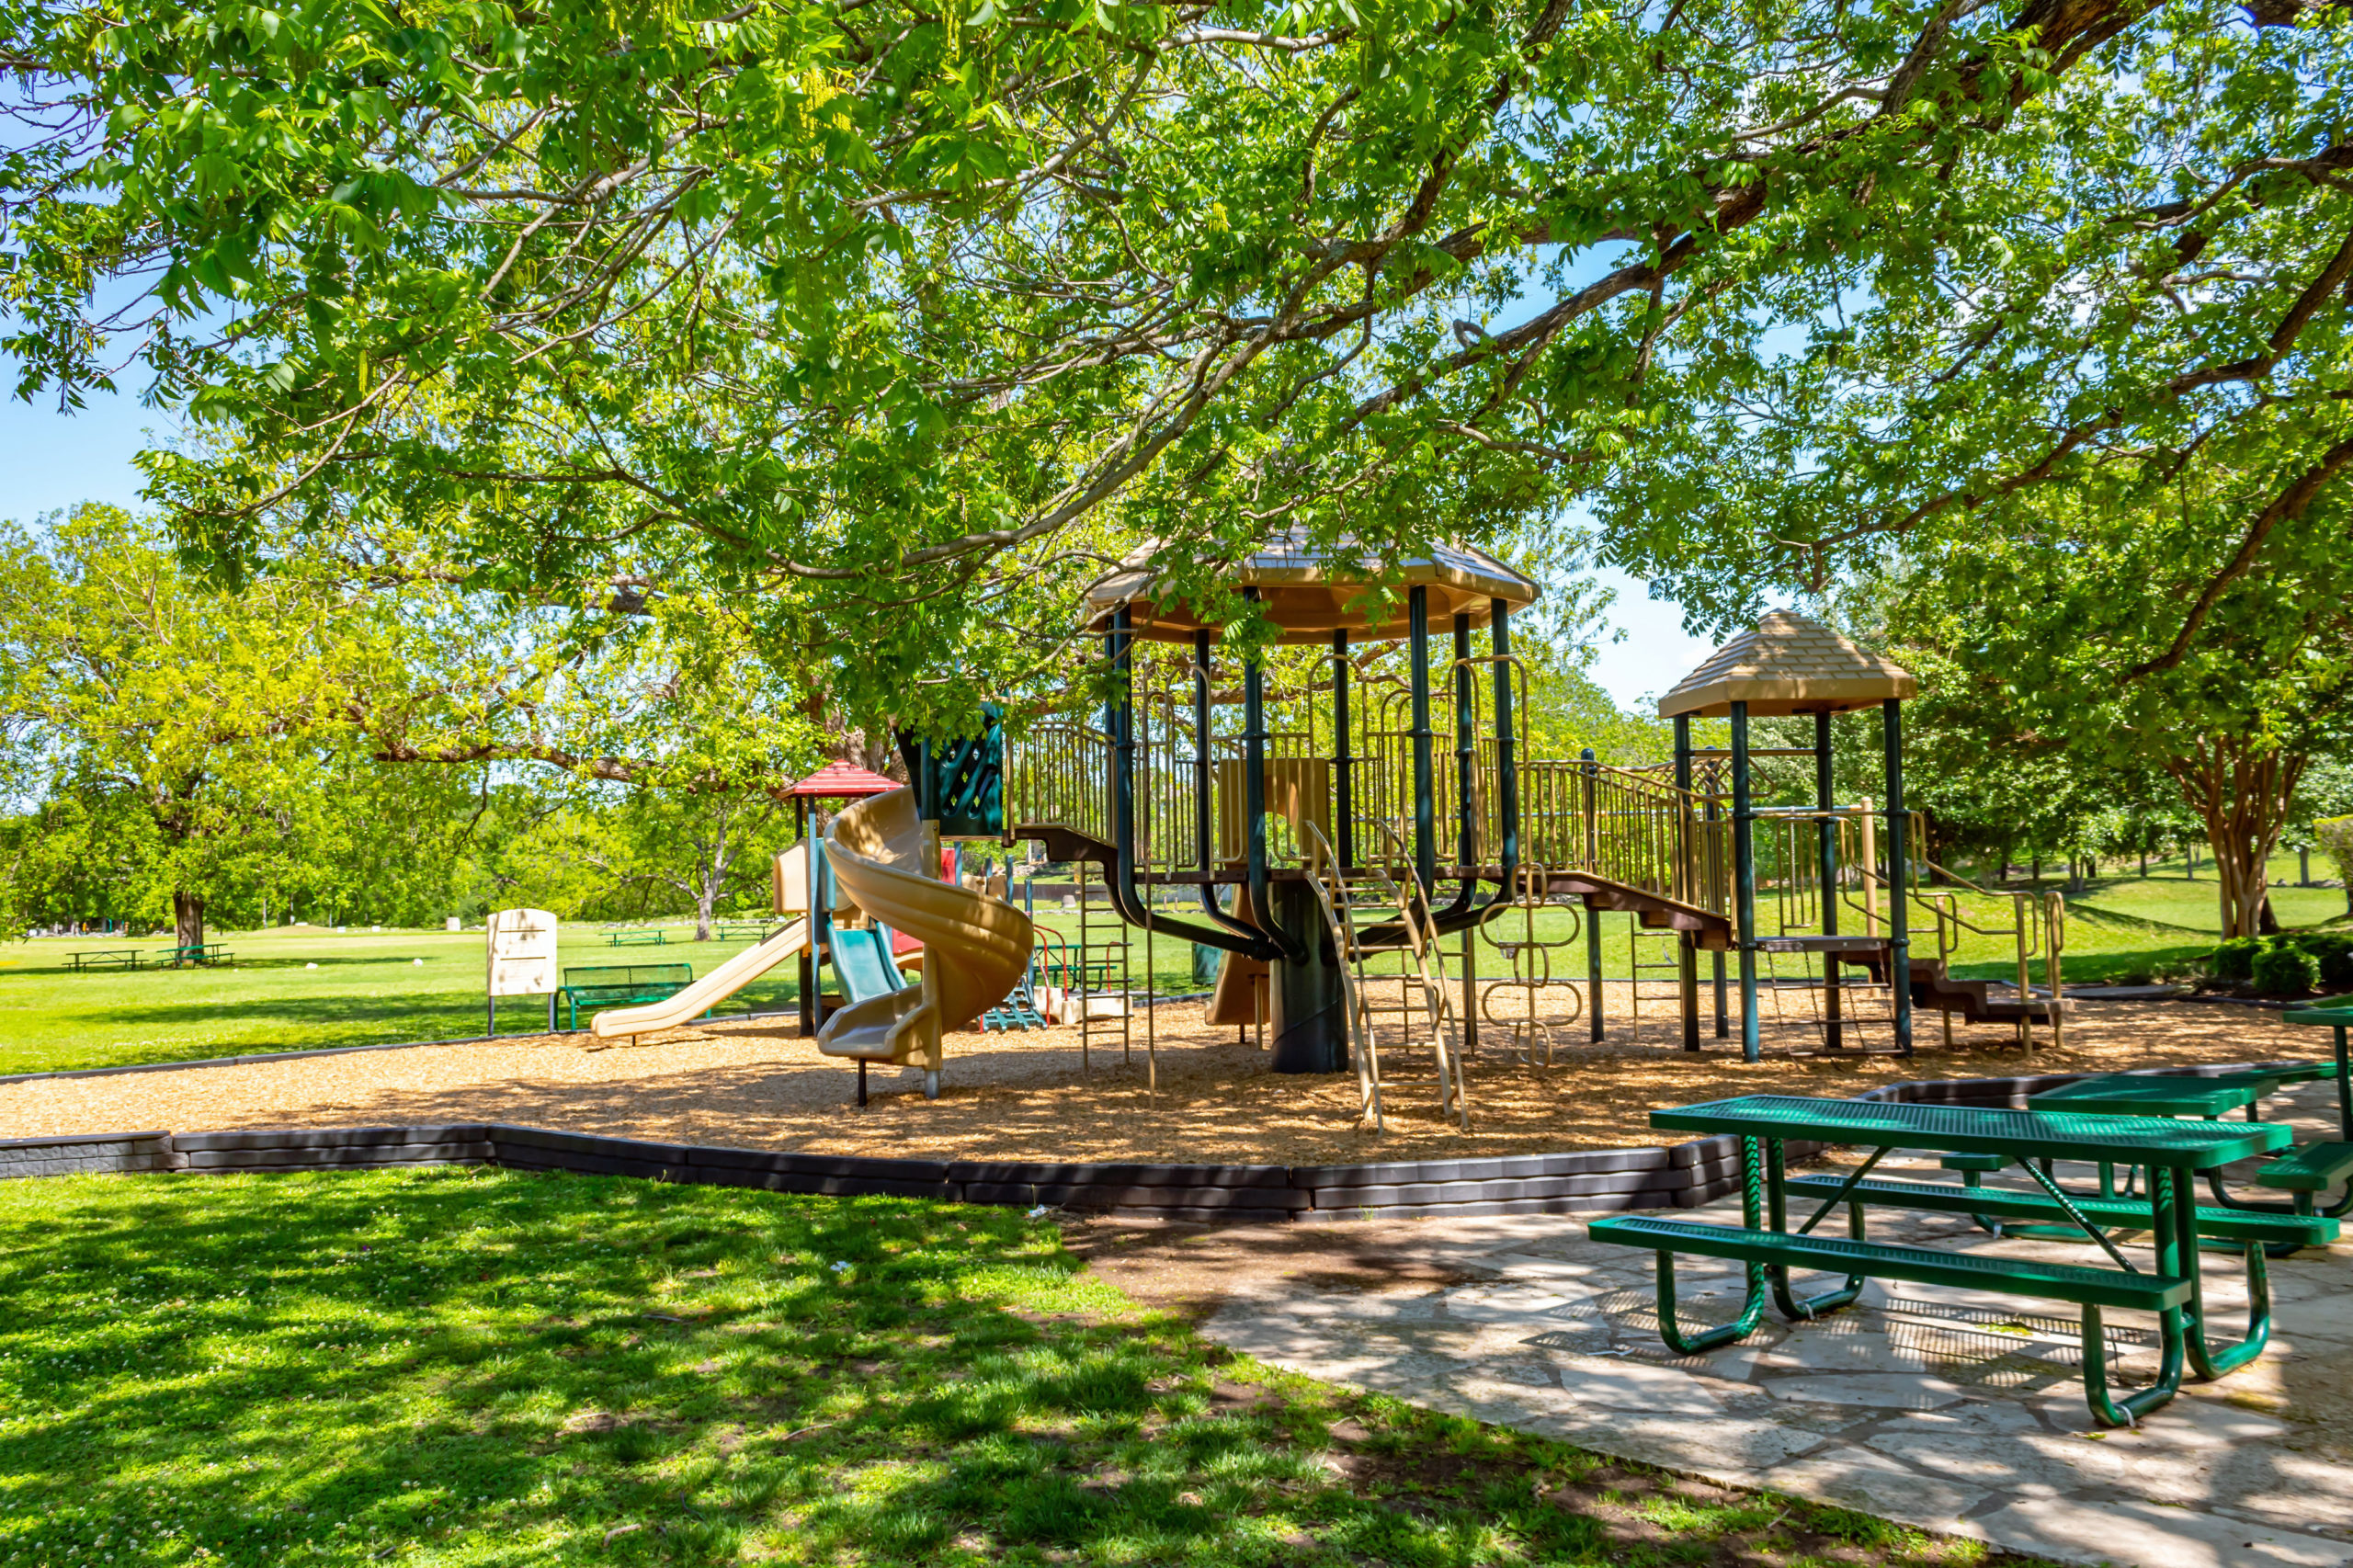 Picture of a playground and picnic tables.